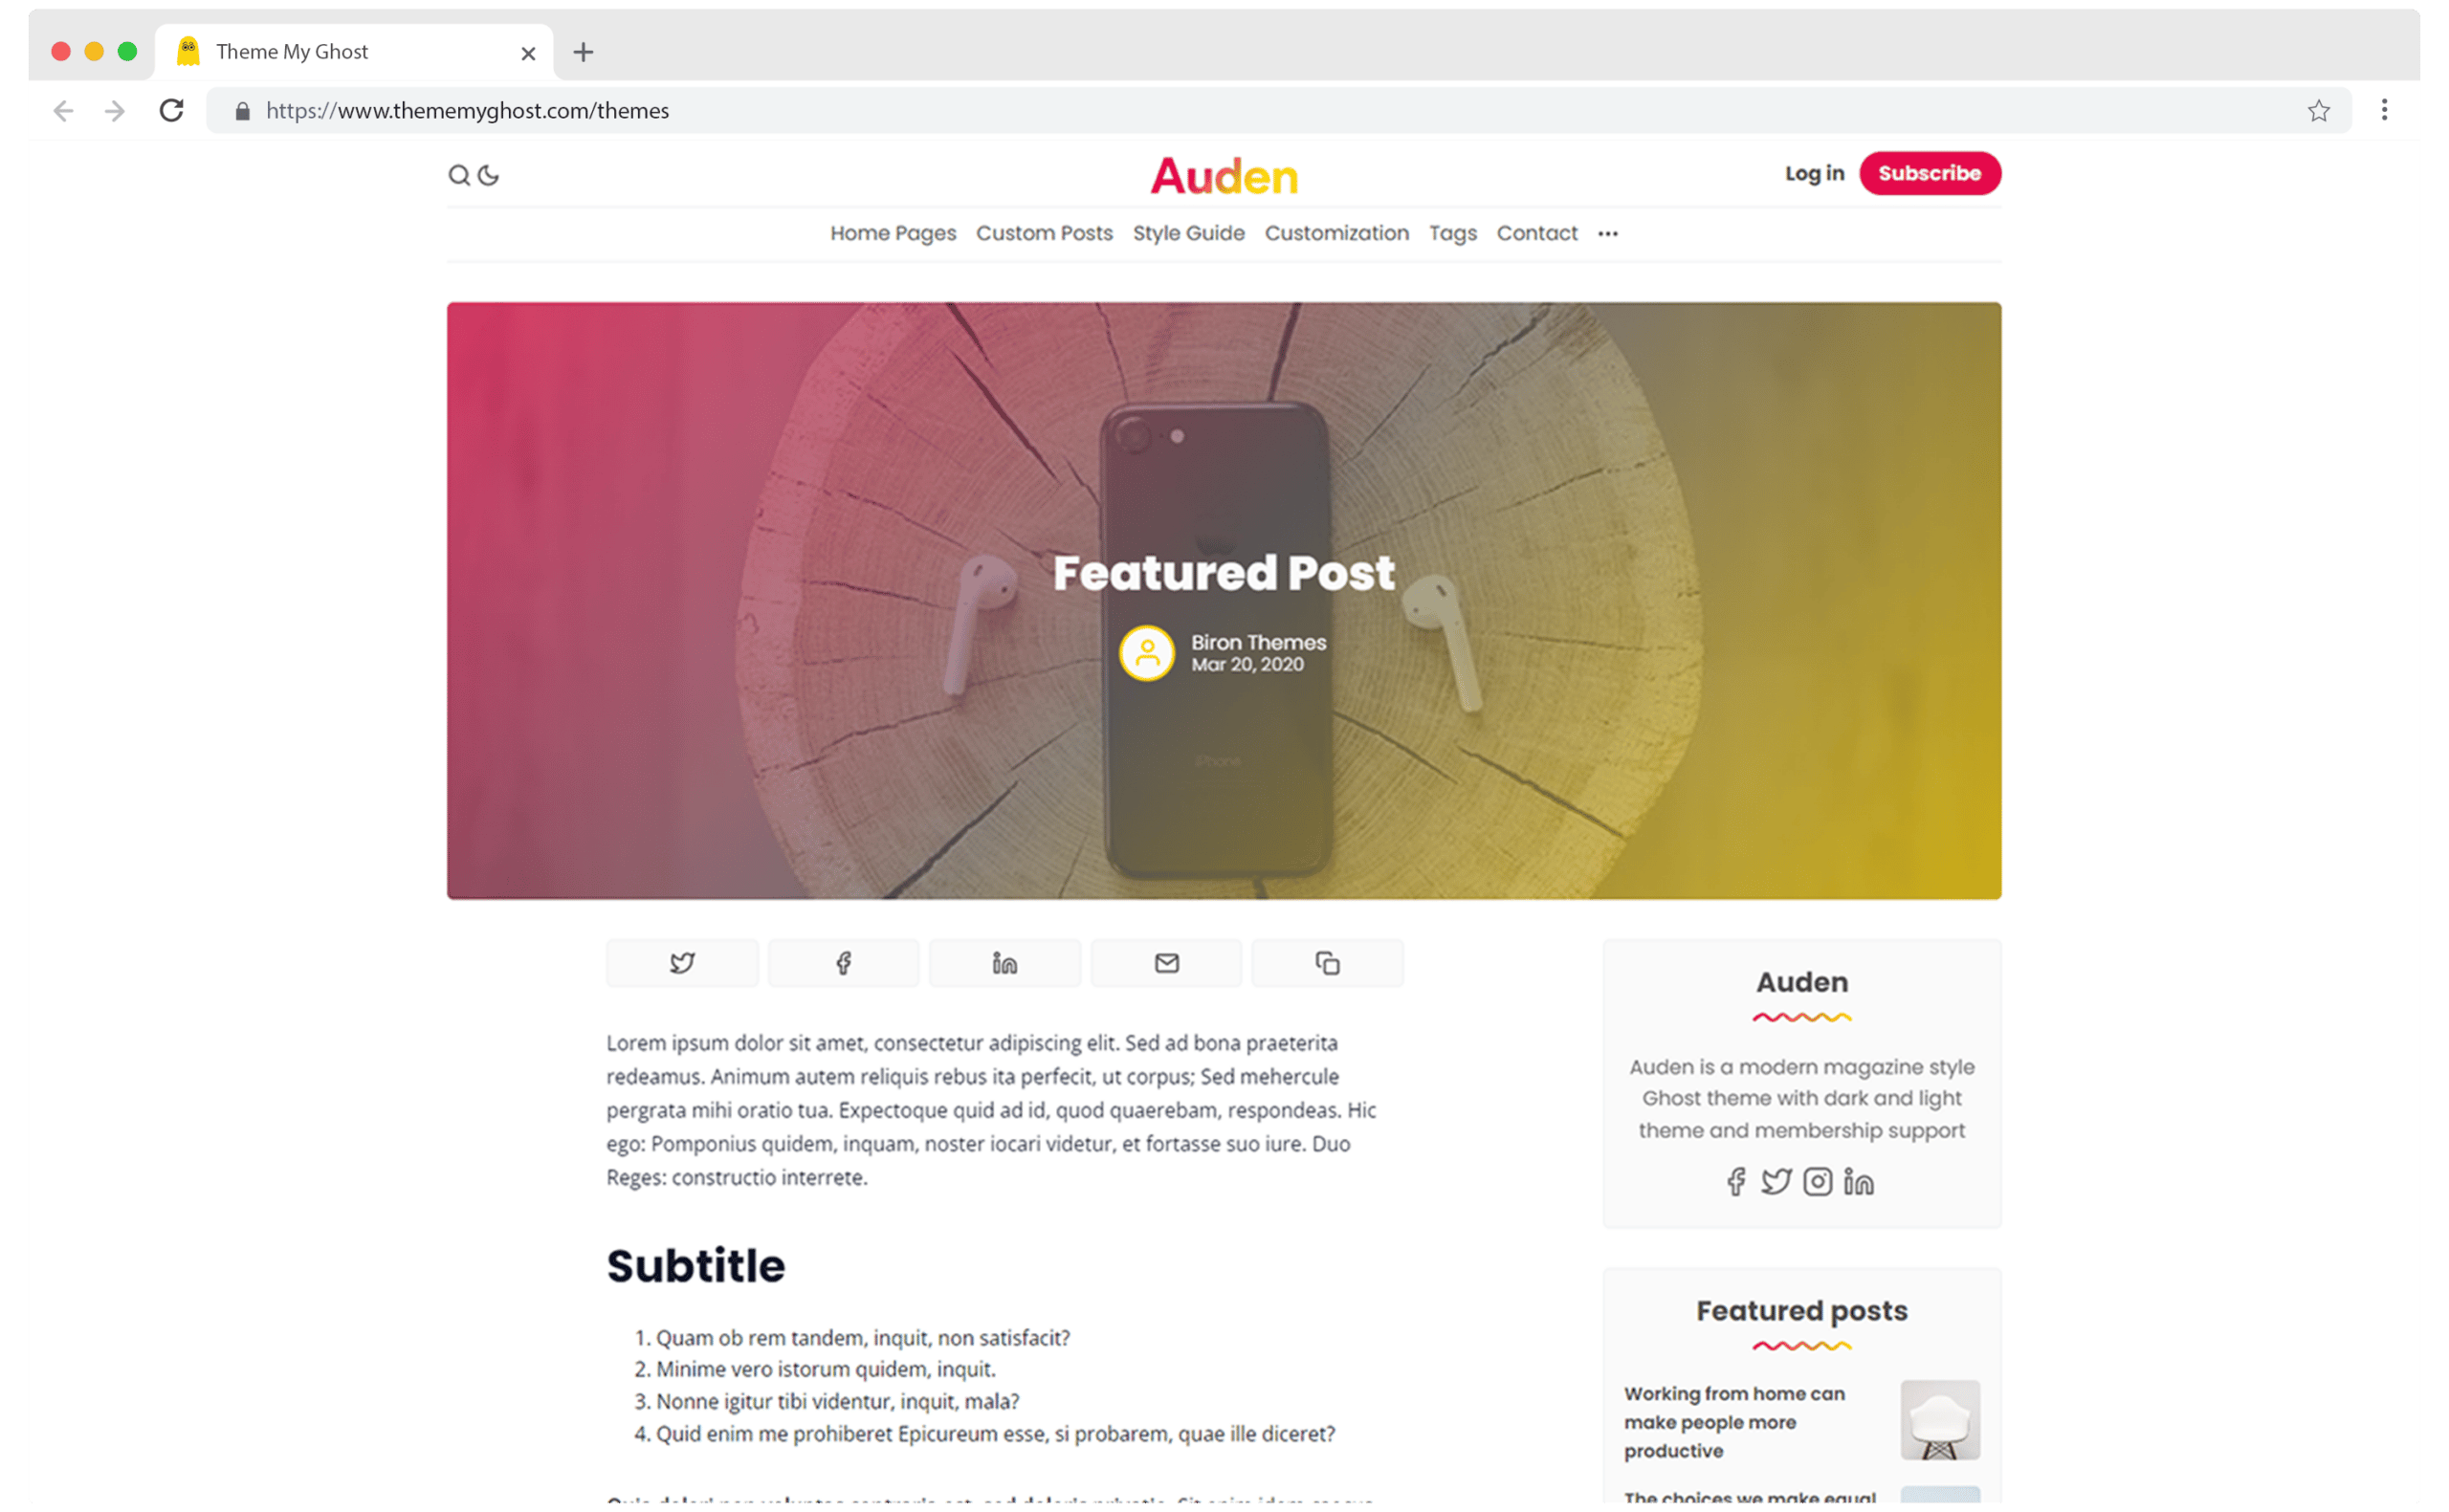 Auden Premium Ghost Theme Template with Dark Mode for Blog Membership and Newsletter by Biron Themes 10